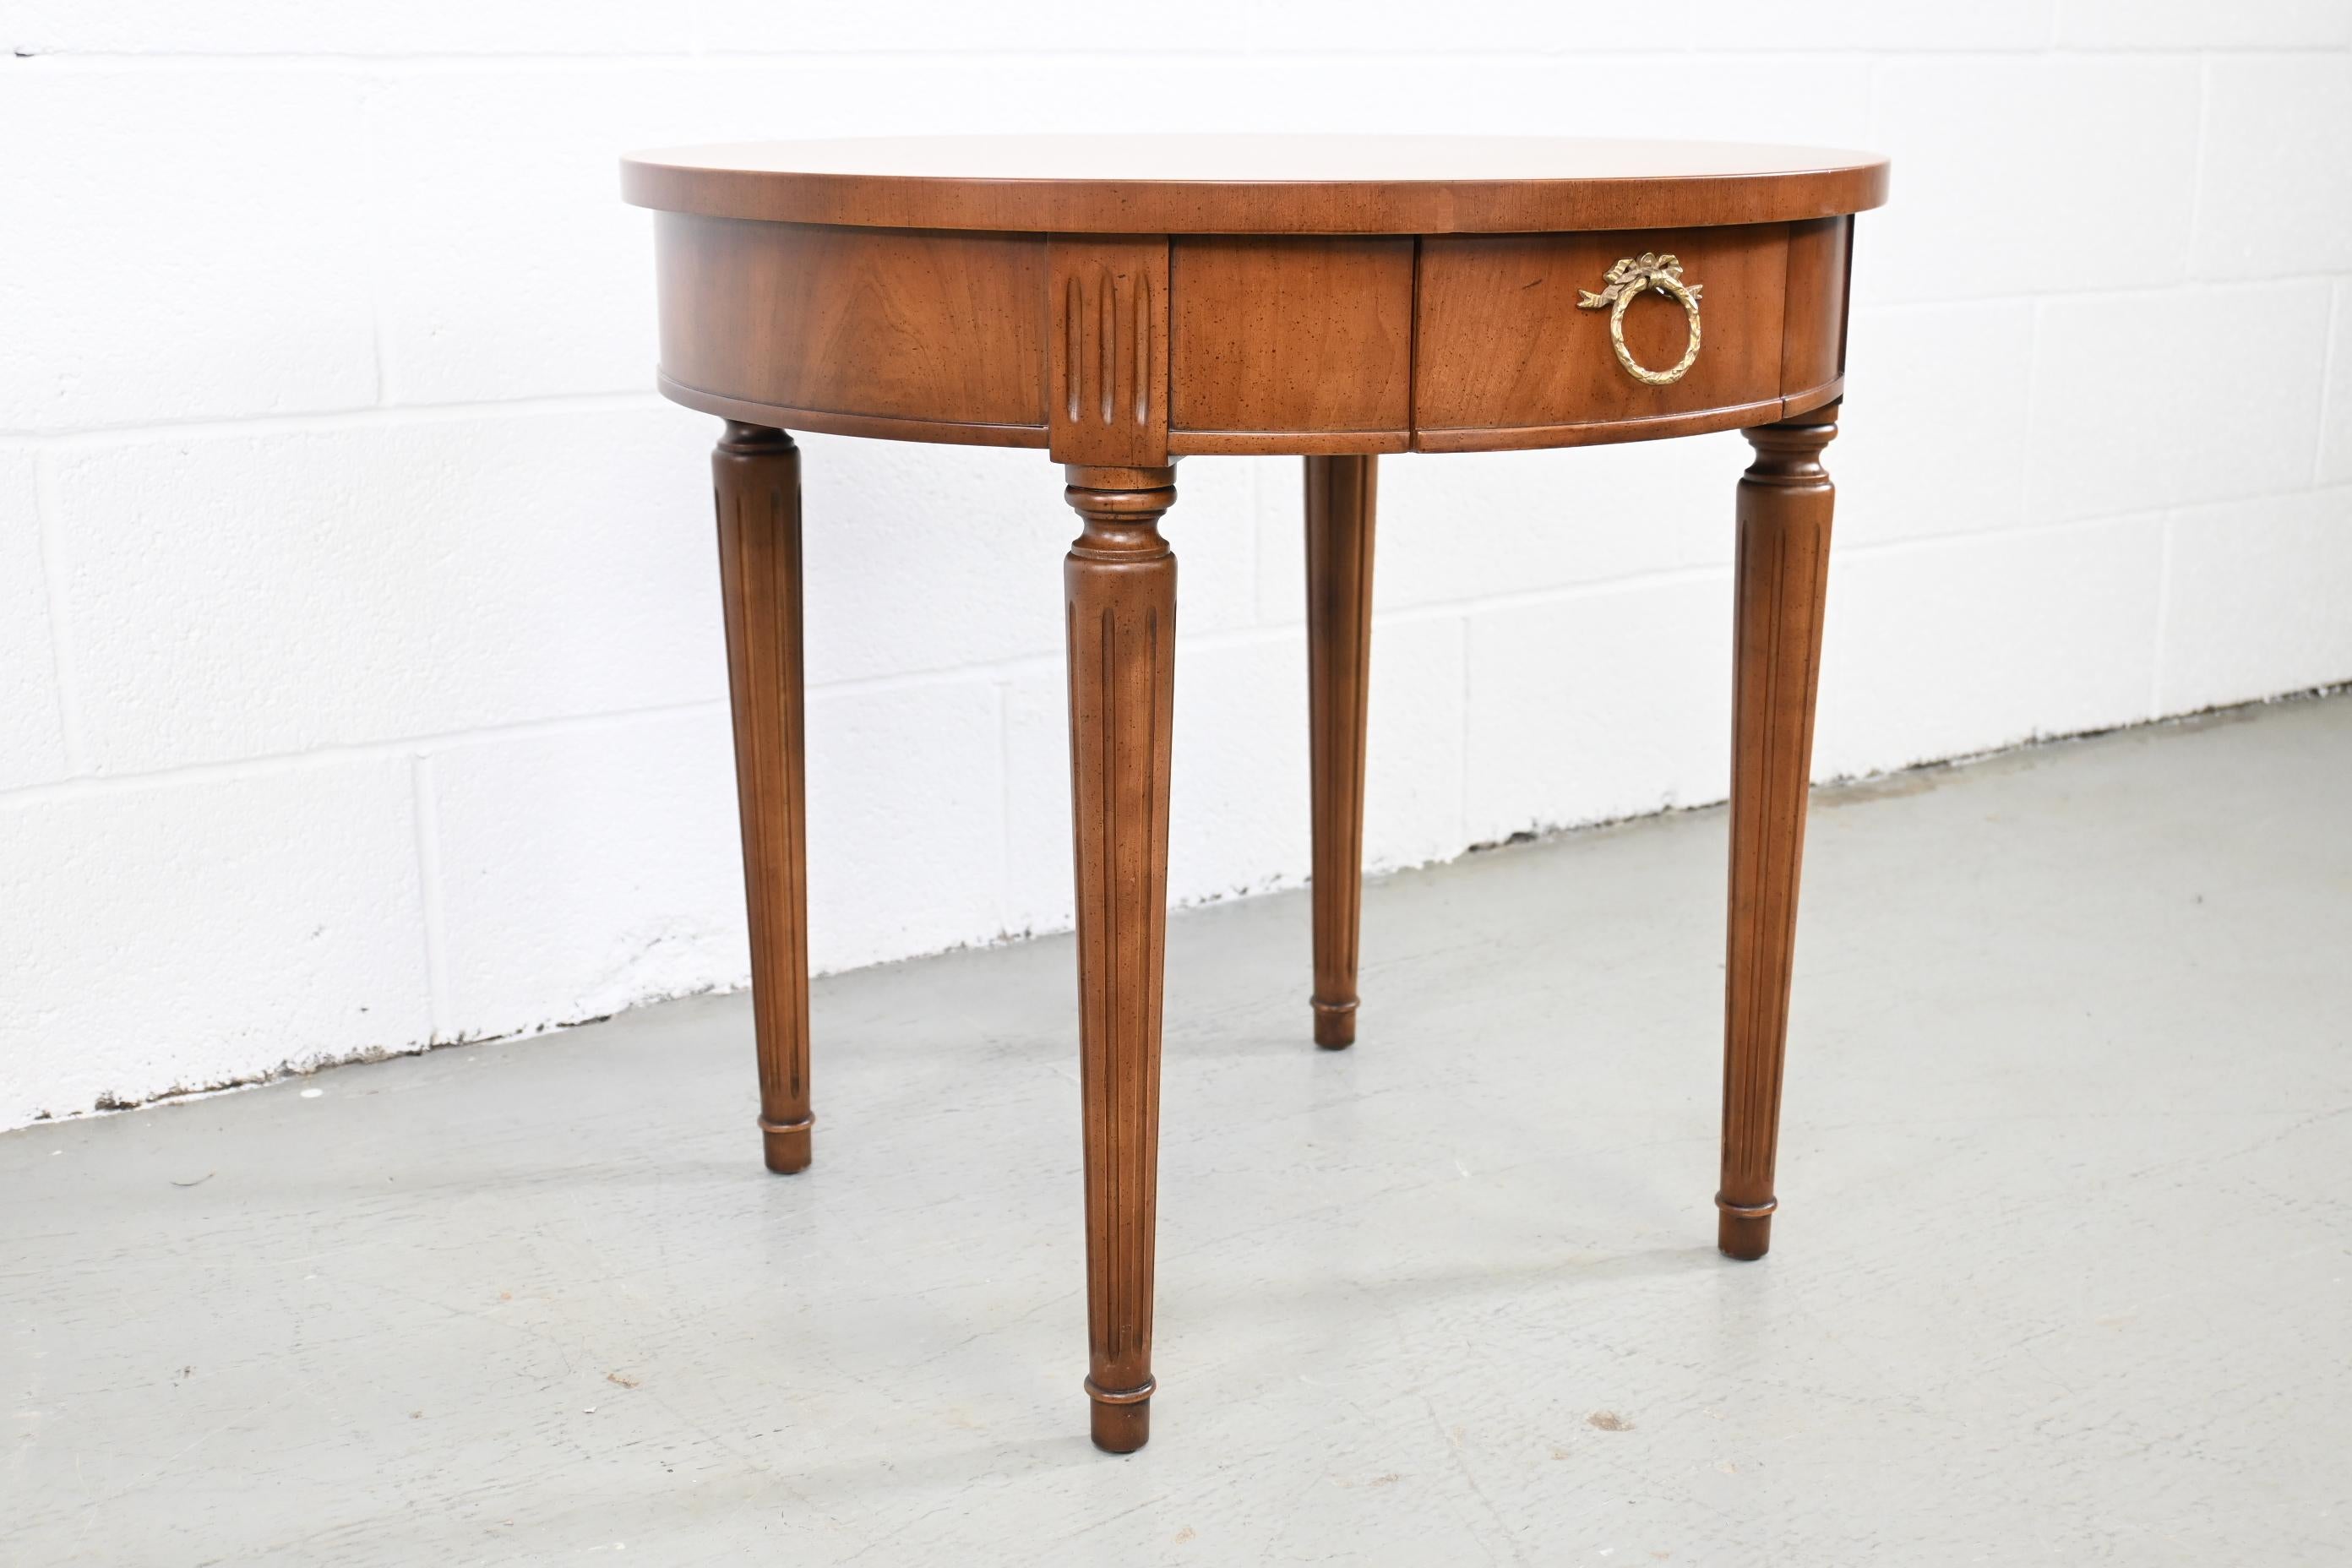 Kindel Furniture neoclassical style round end or side table with one drawer

Kindel Furniture, USA, 1970s

Measures: 24.25 Wide x 24.25 Deep x 22.25 High.

Neoclassical style round side table with one drawer and brass pull.

Newly